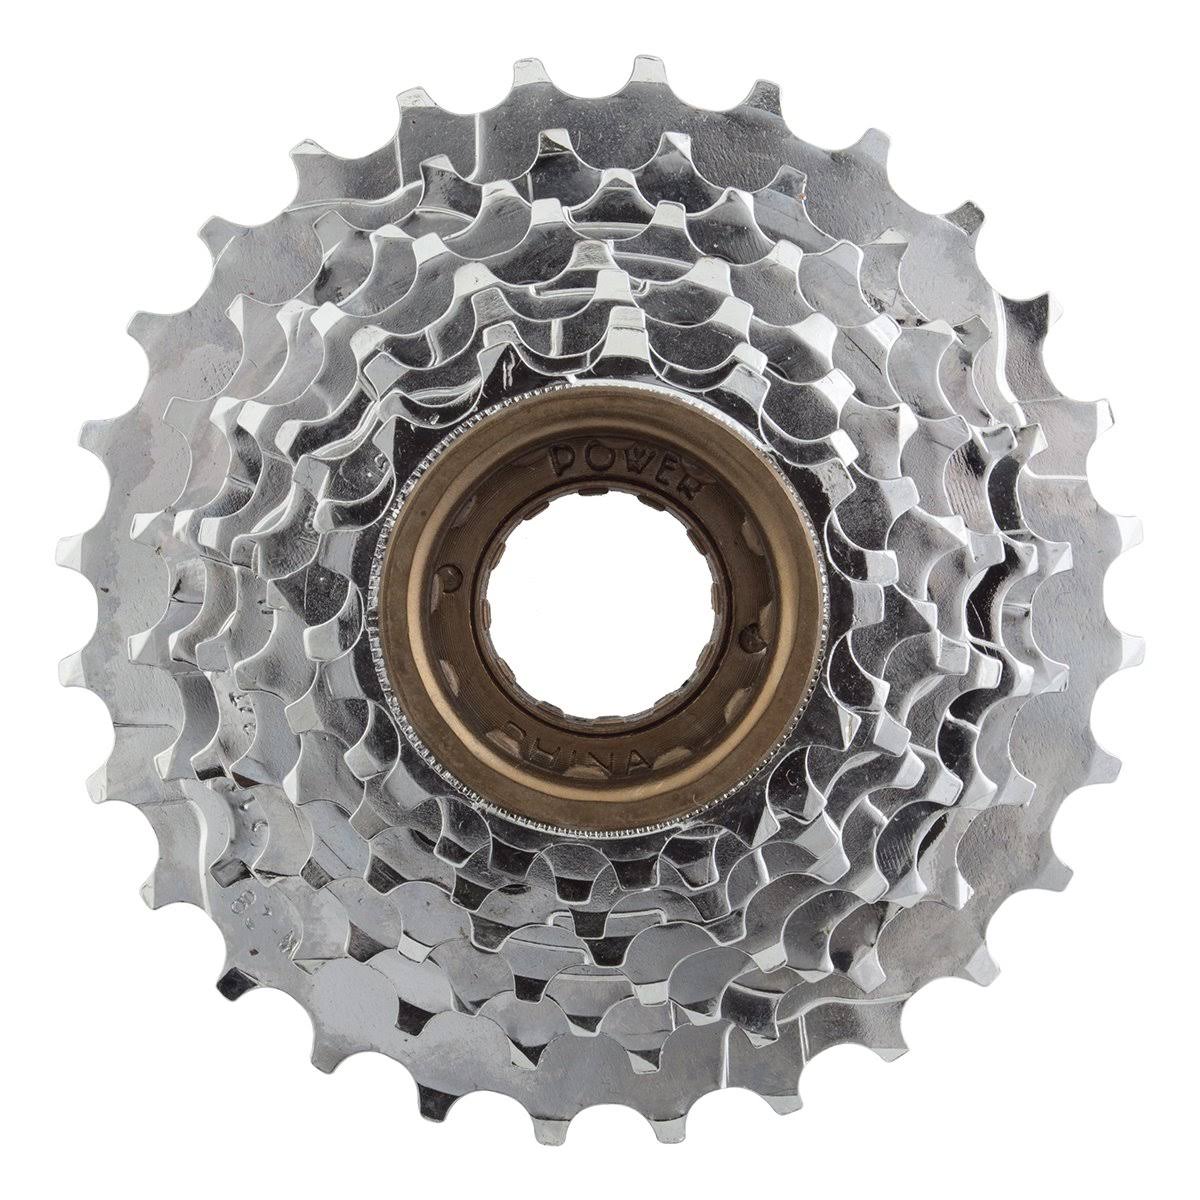 Sunlite 8 Speed Freewheel - Chrome Plated, 13 to 28t